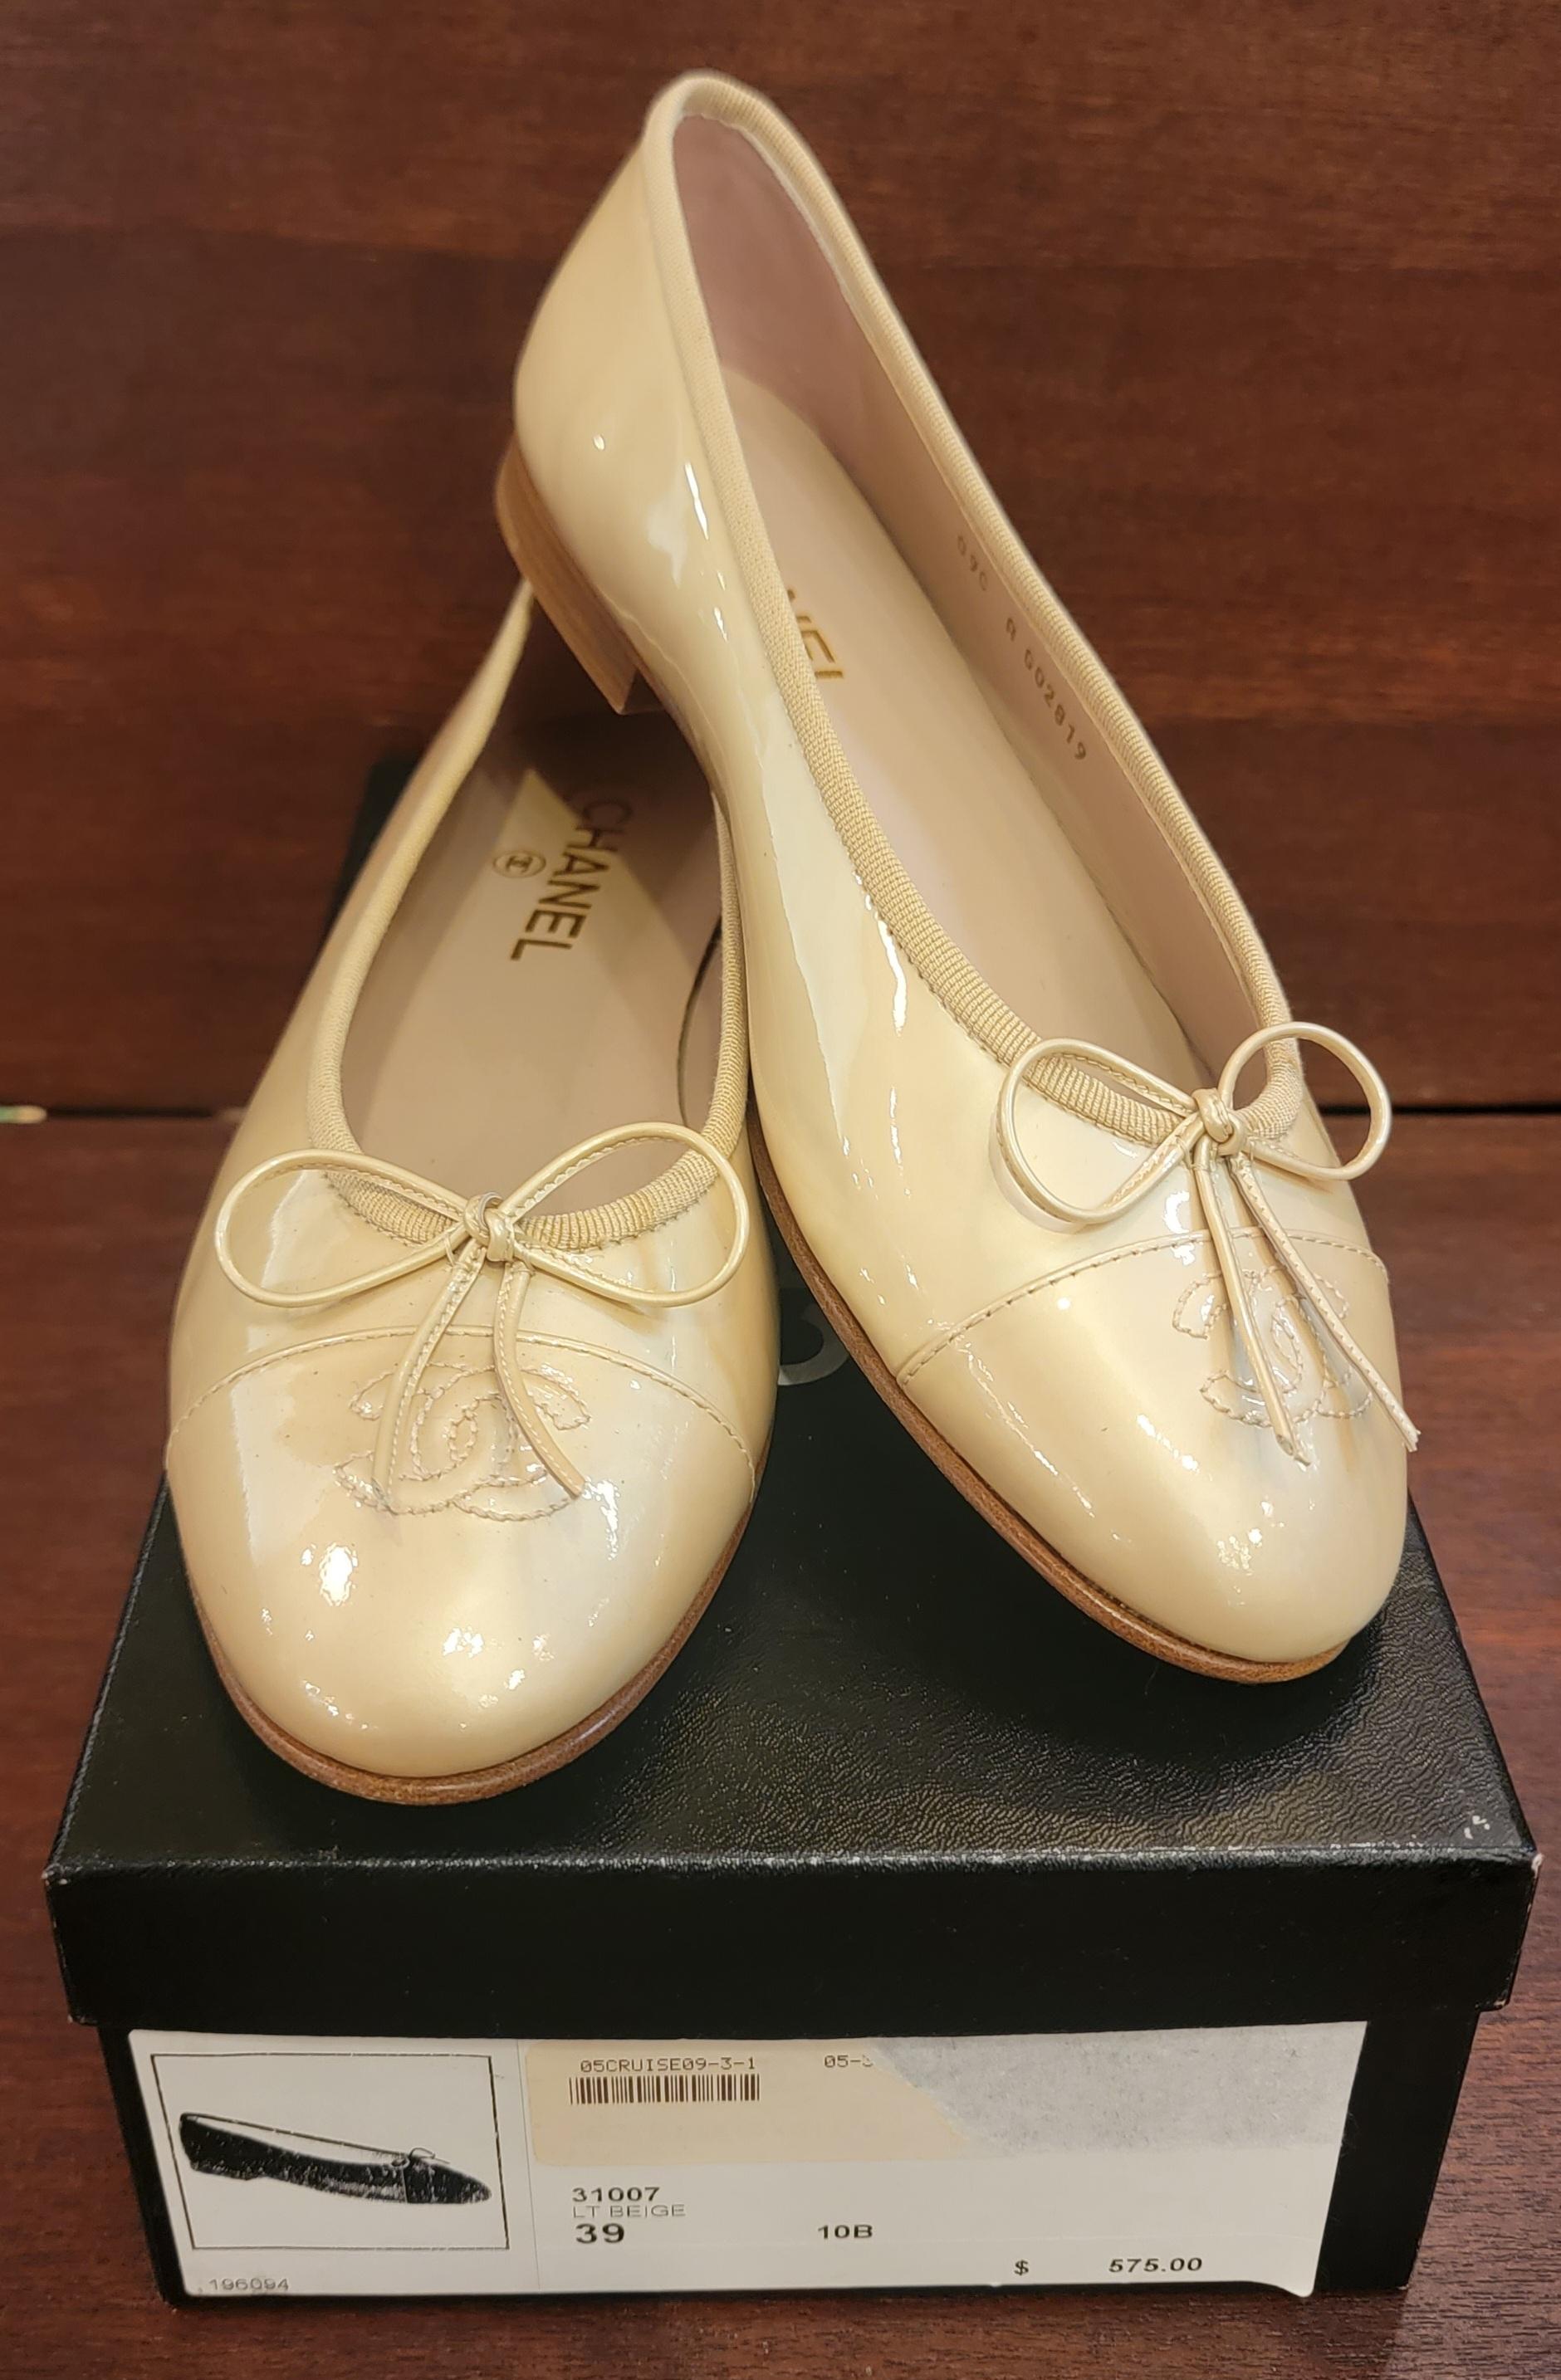 Rare Brand New Chanel Ballerina Size 39 Tan Bow Tie Shoes 1